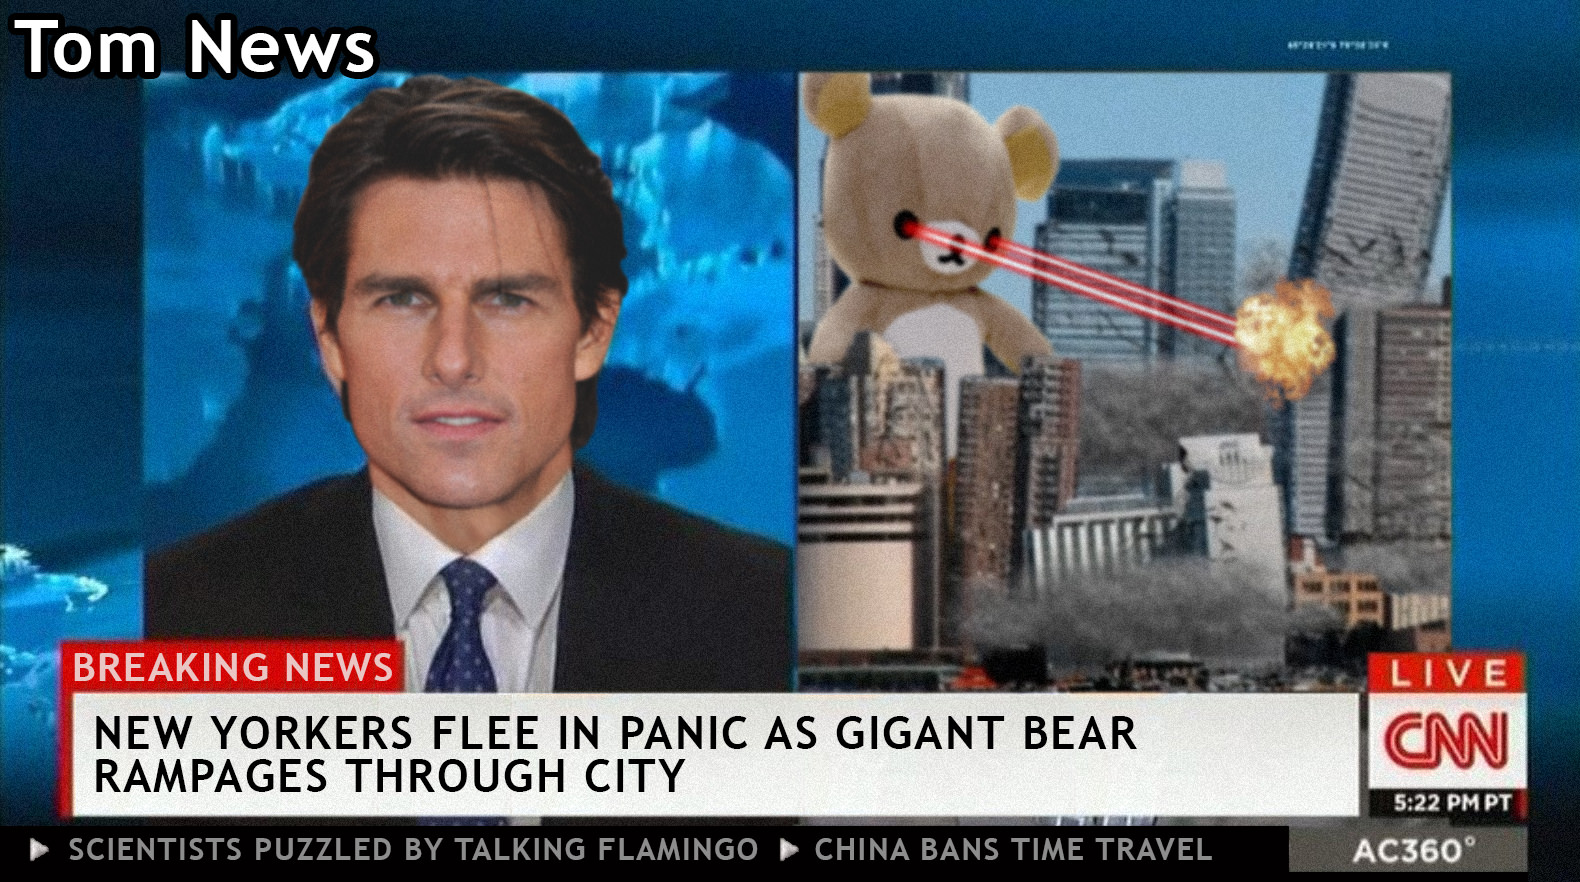 tom cruise pun - Tom News Live Breaking News New Yorkers Flee In Panic As Gigant Bear Rampages Through City Cnn Scientists Puzzled By Talking Flamingo China Bans Time Travel Pt AC360"